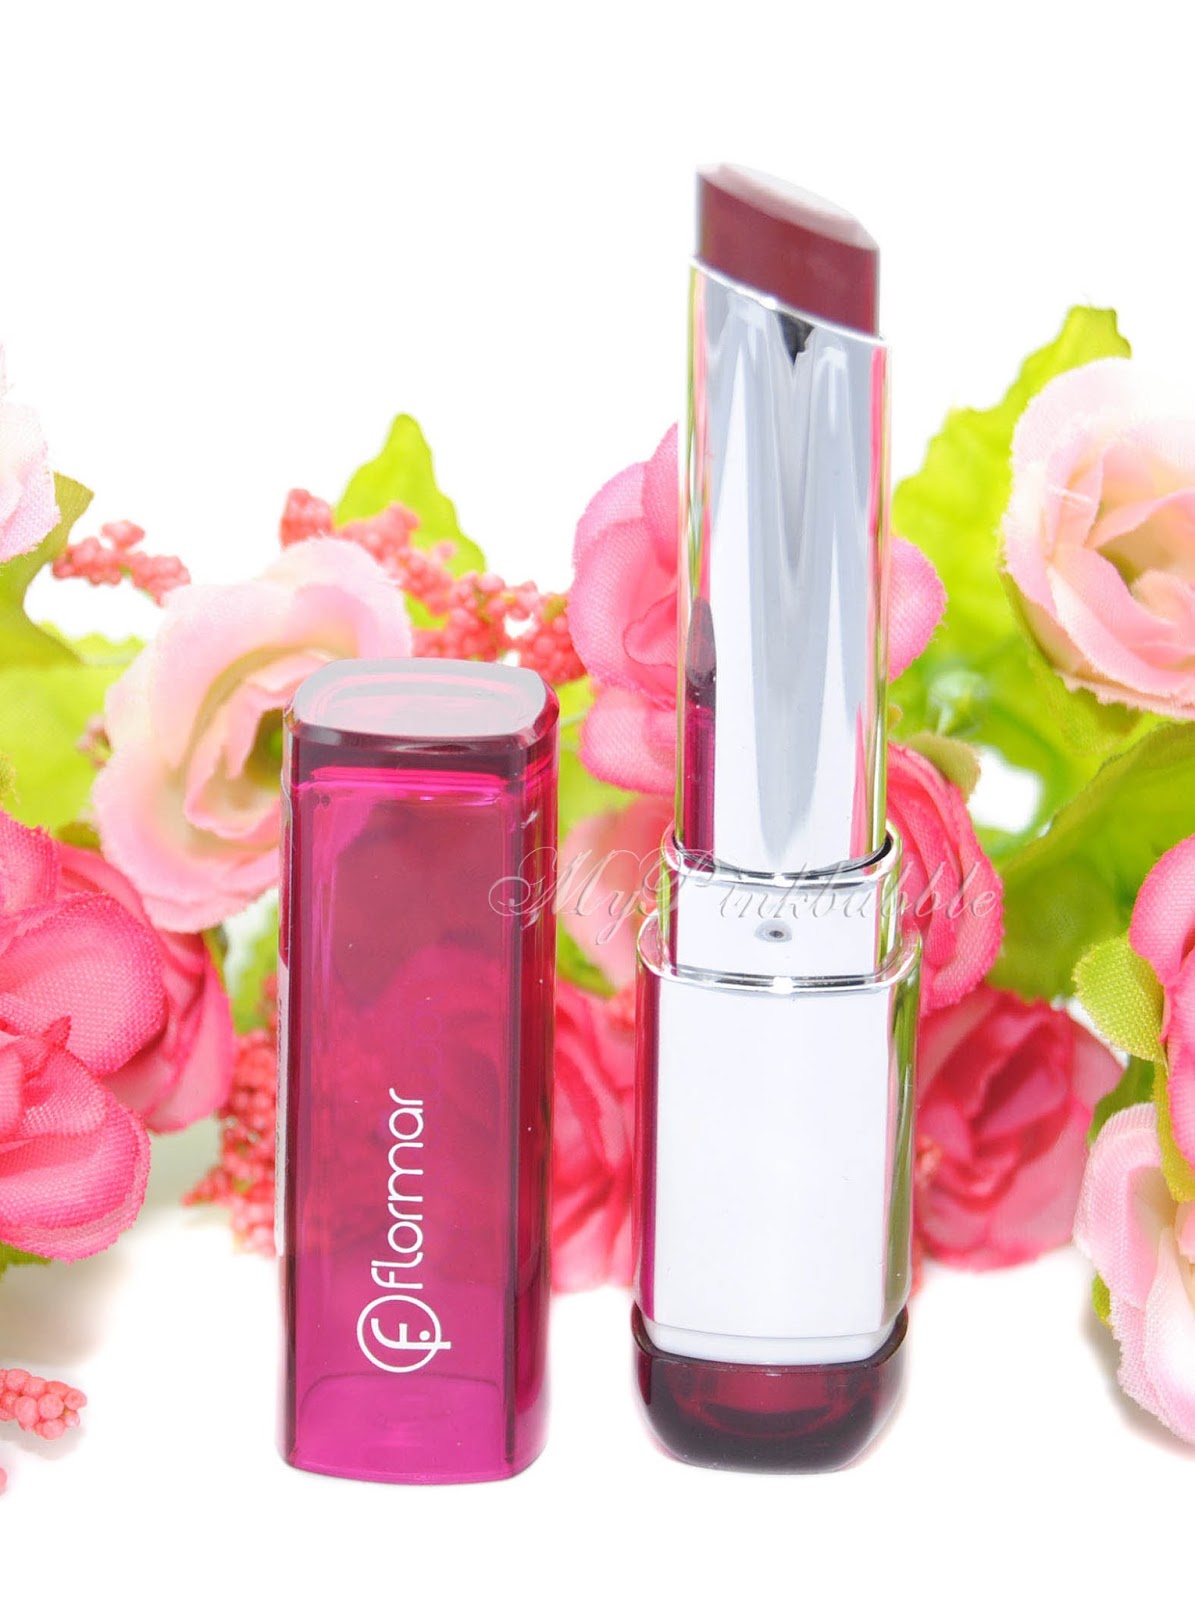 Flormar Delicious Lipstick Stylo Rise of modern city